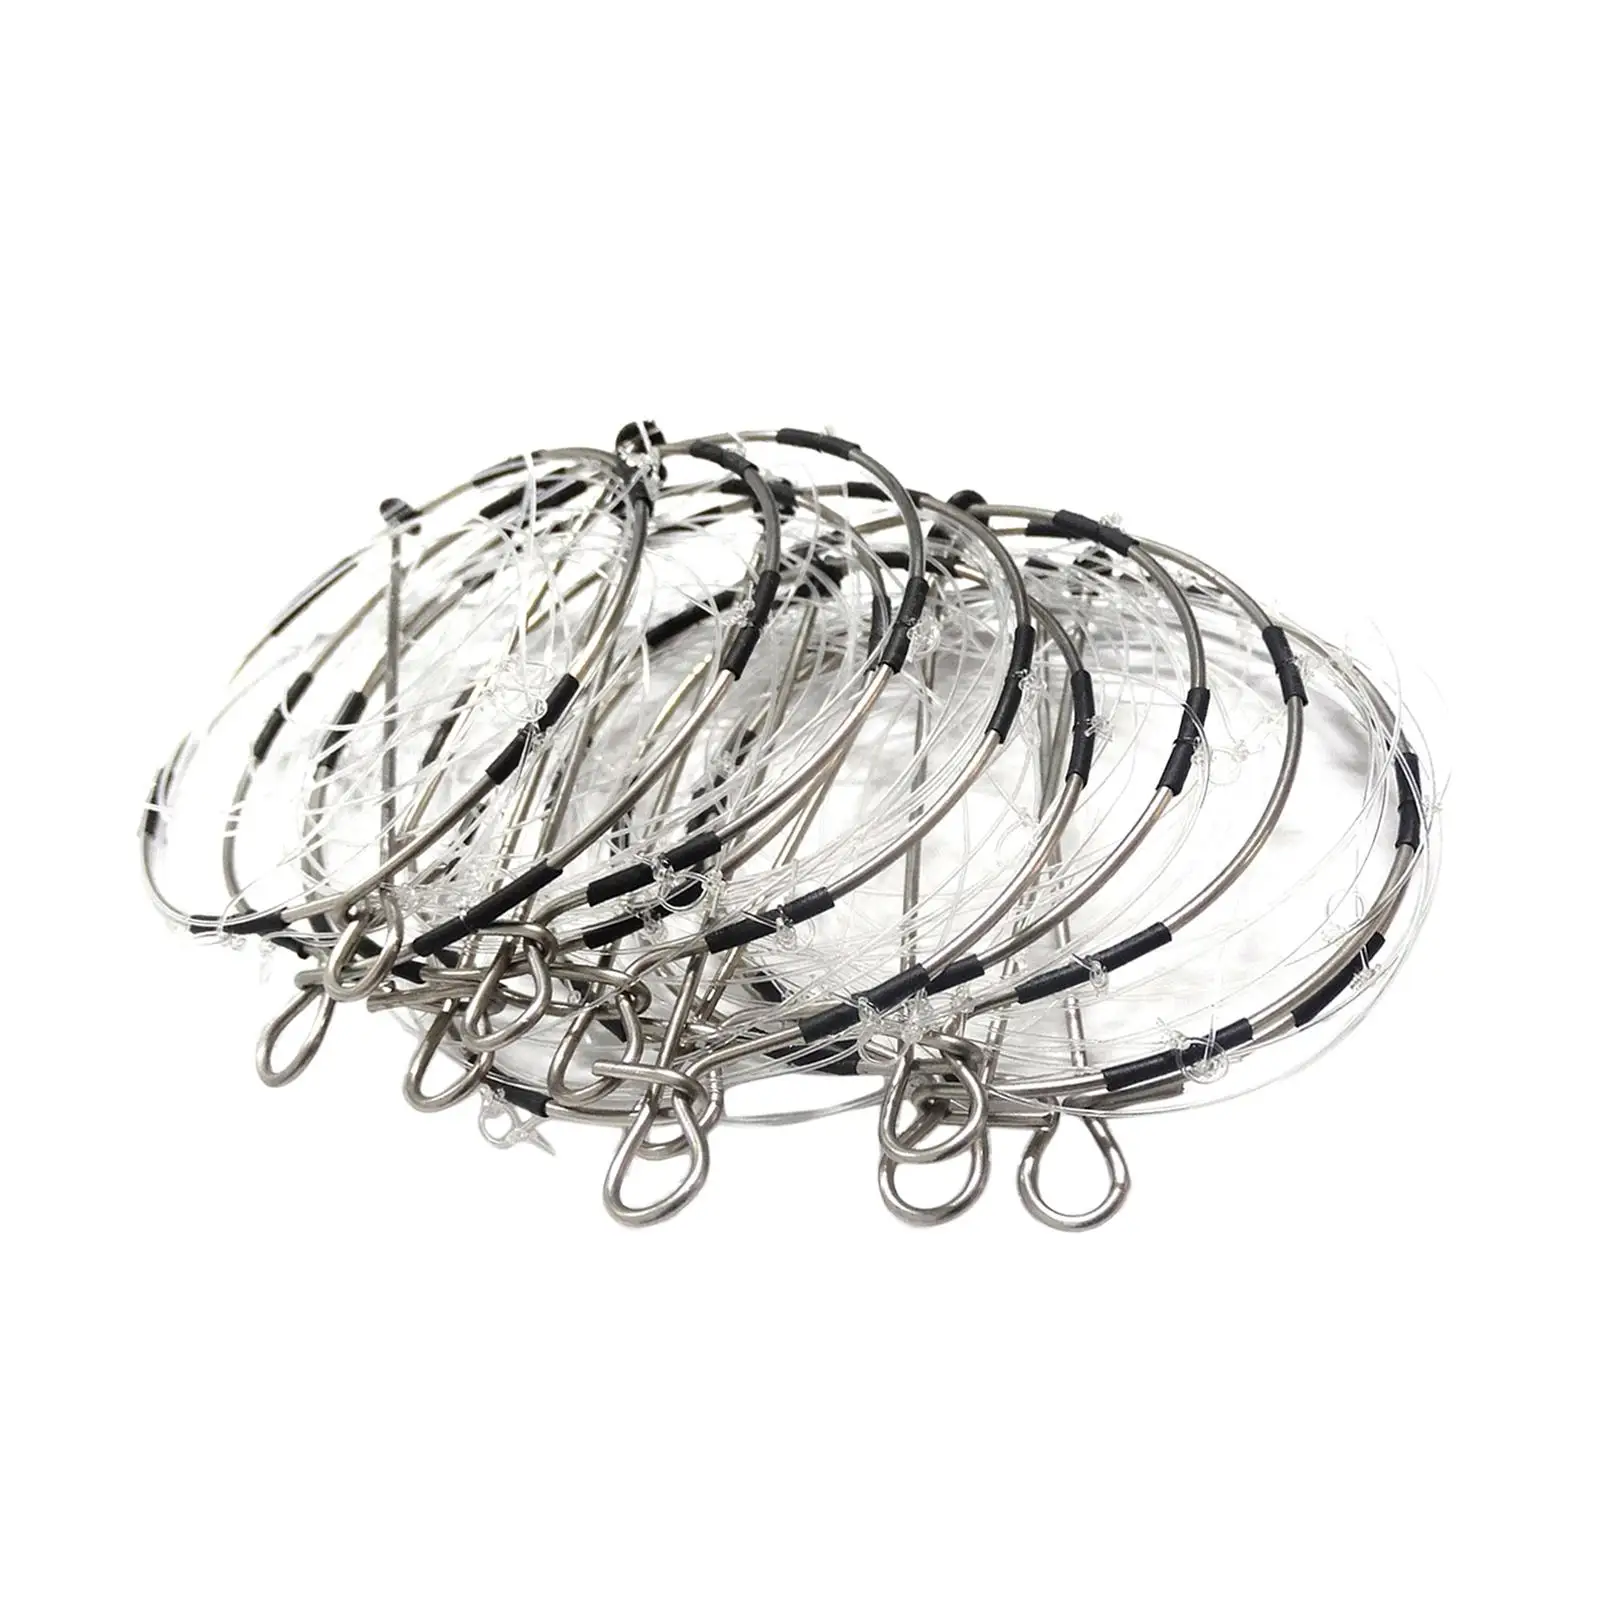 10 Pieces Crab Cast Trap 6-ring Cast Dip Cage Repeated Use Steel Catch Crabs Tool for Crawfish crab lobsters shrimp Seaside